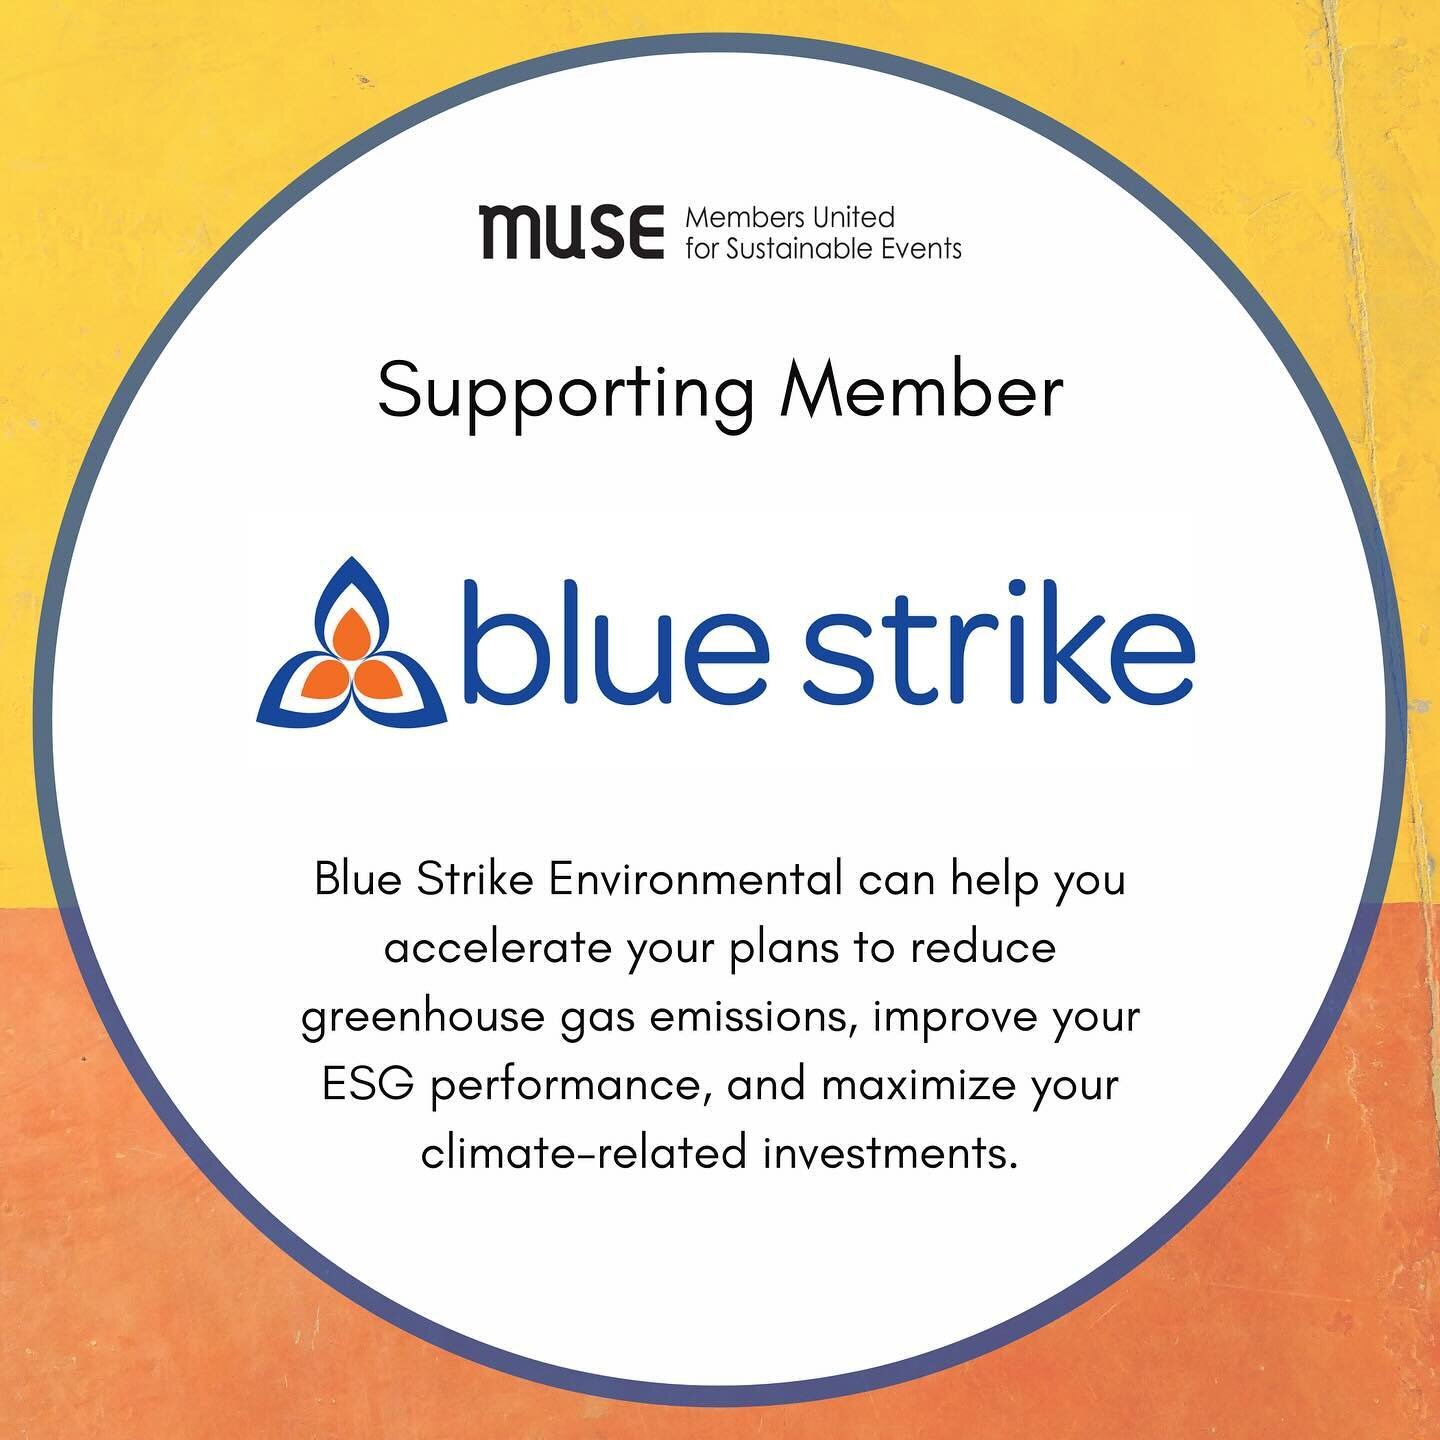 MUSE is honored to have @bluestrikeenvironmental (BSE) as a Supporting Member.

Whether you manage an event, a stadium, a municipality, a campus, or a community, Blue Strike Environmental&rsquo;s team of sustainability experts can help you accelerate